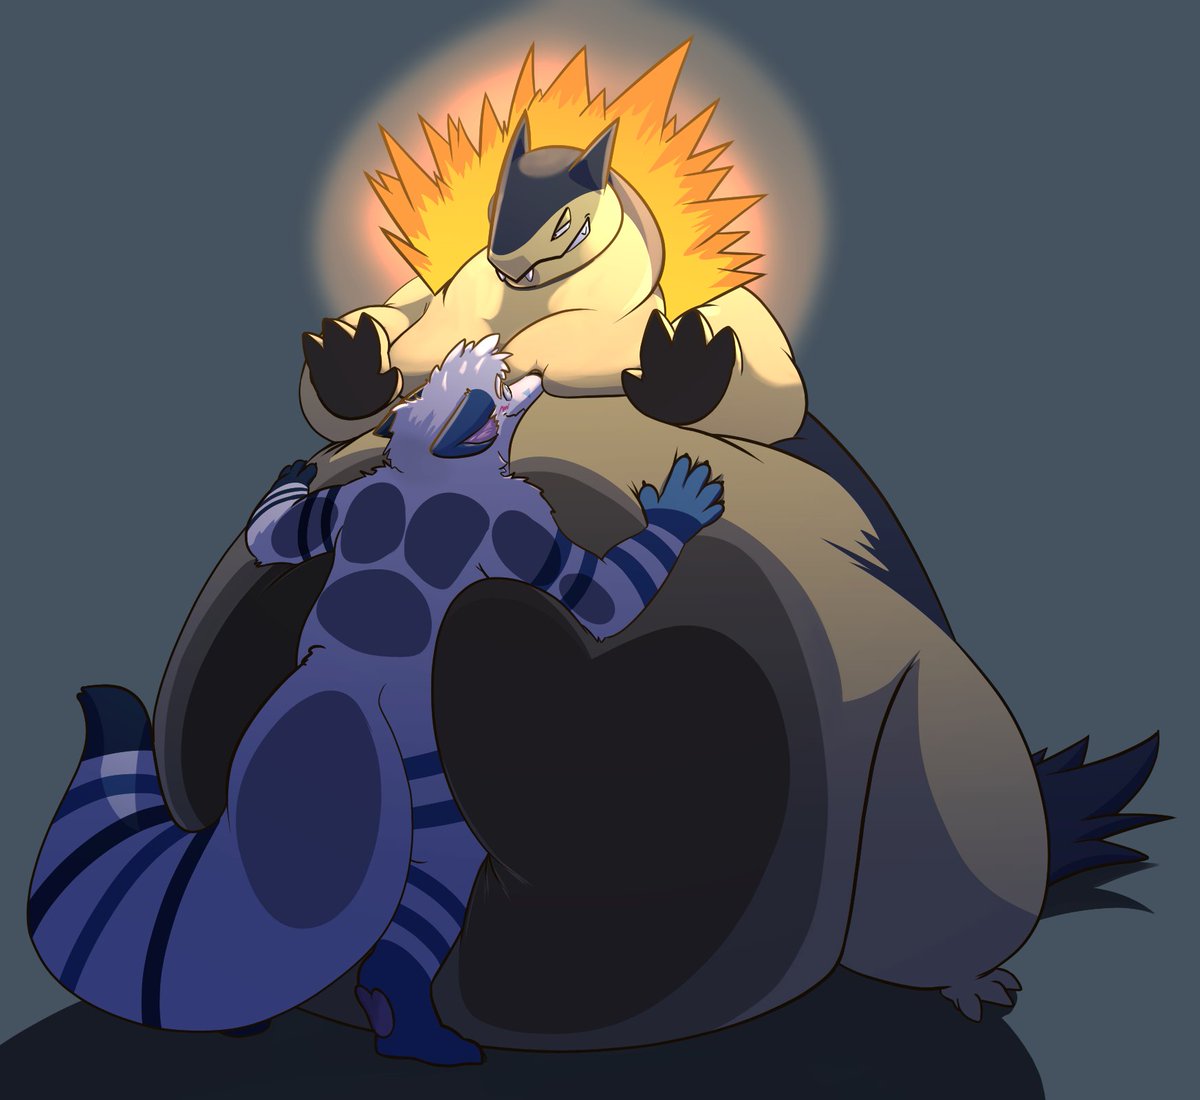 Did you know that Typhlosion is like in my top 5 favorite Pokemon @/Cavios_